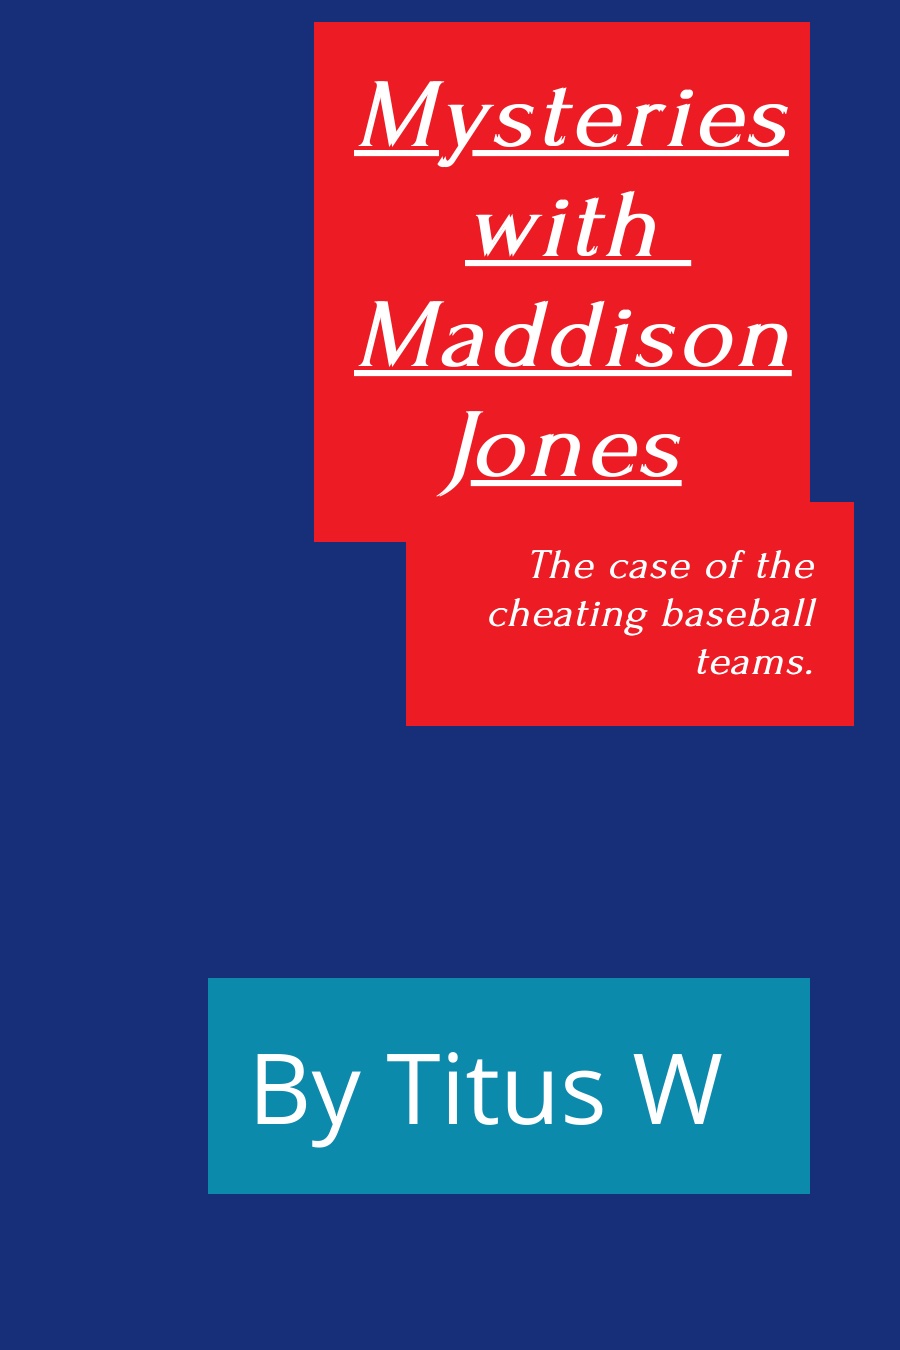 Mysteries With Maddsion Jones by Titus W